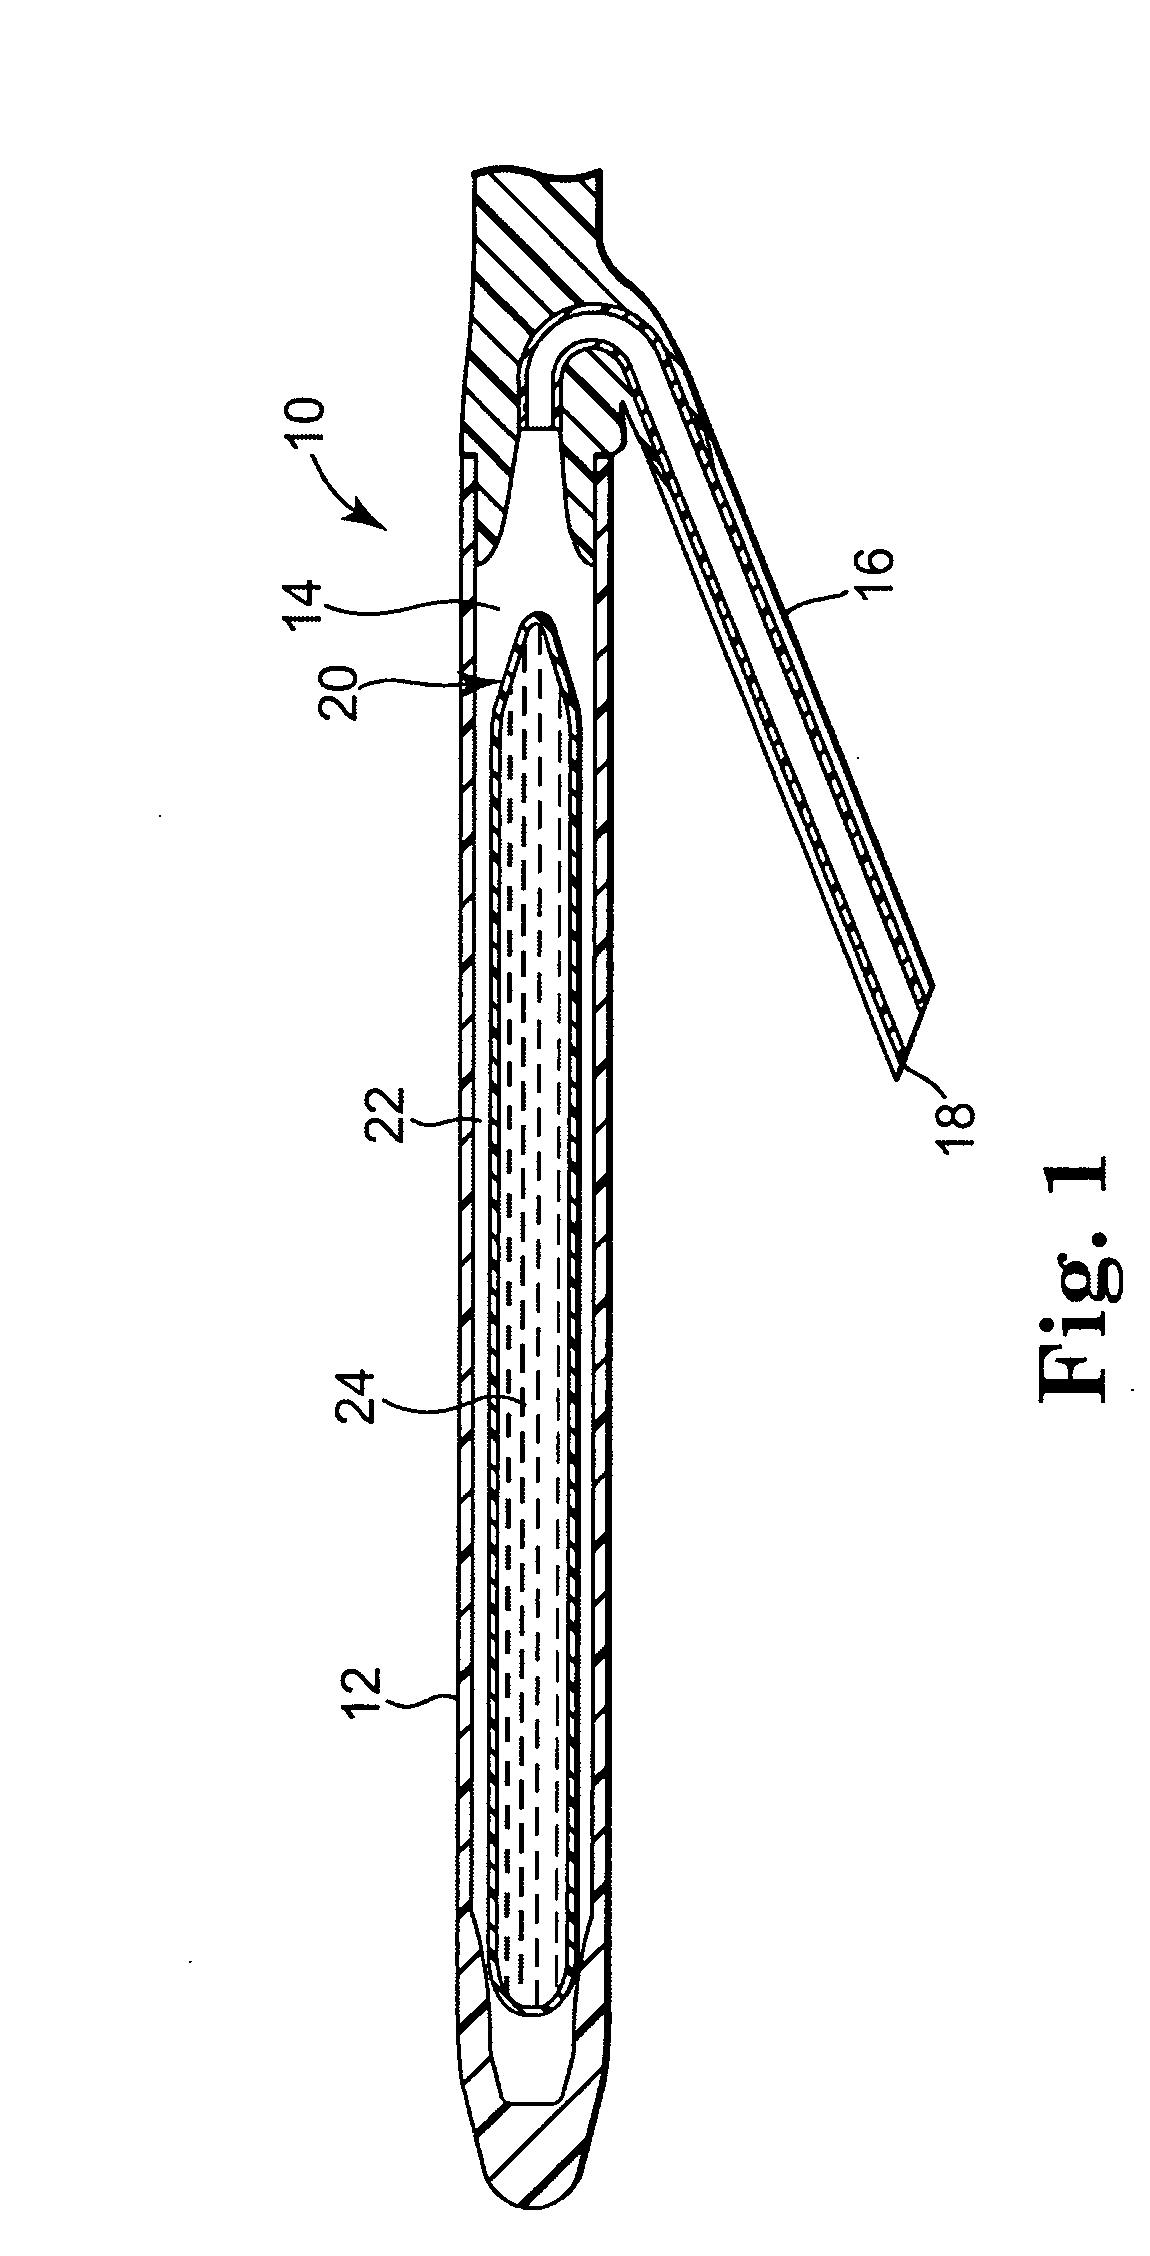 Inflatable penile prosthesis with volume displacement materials and devices